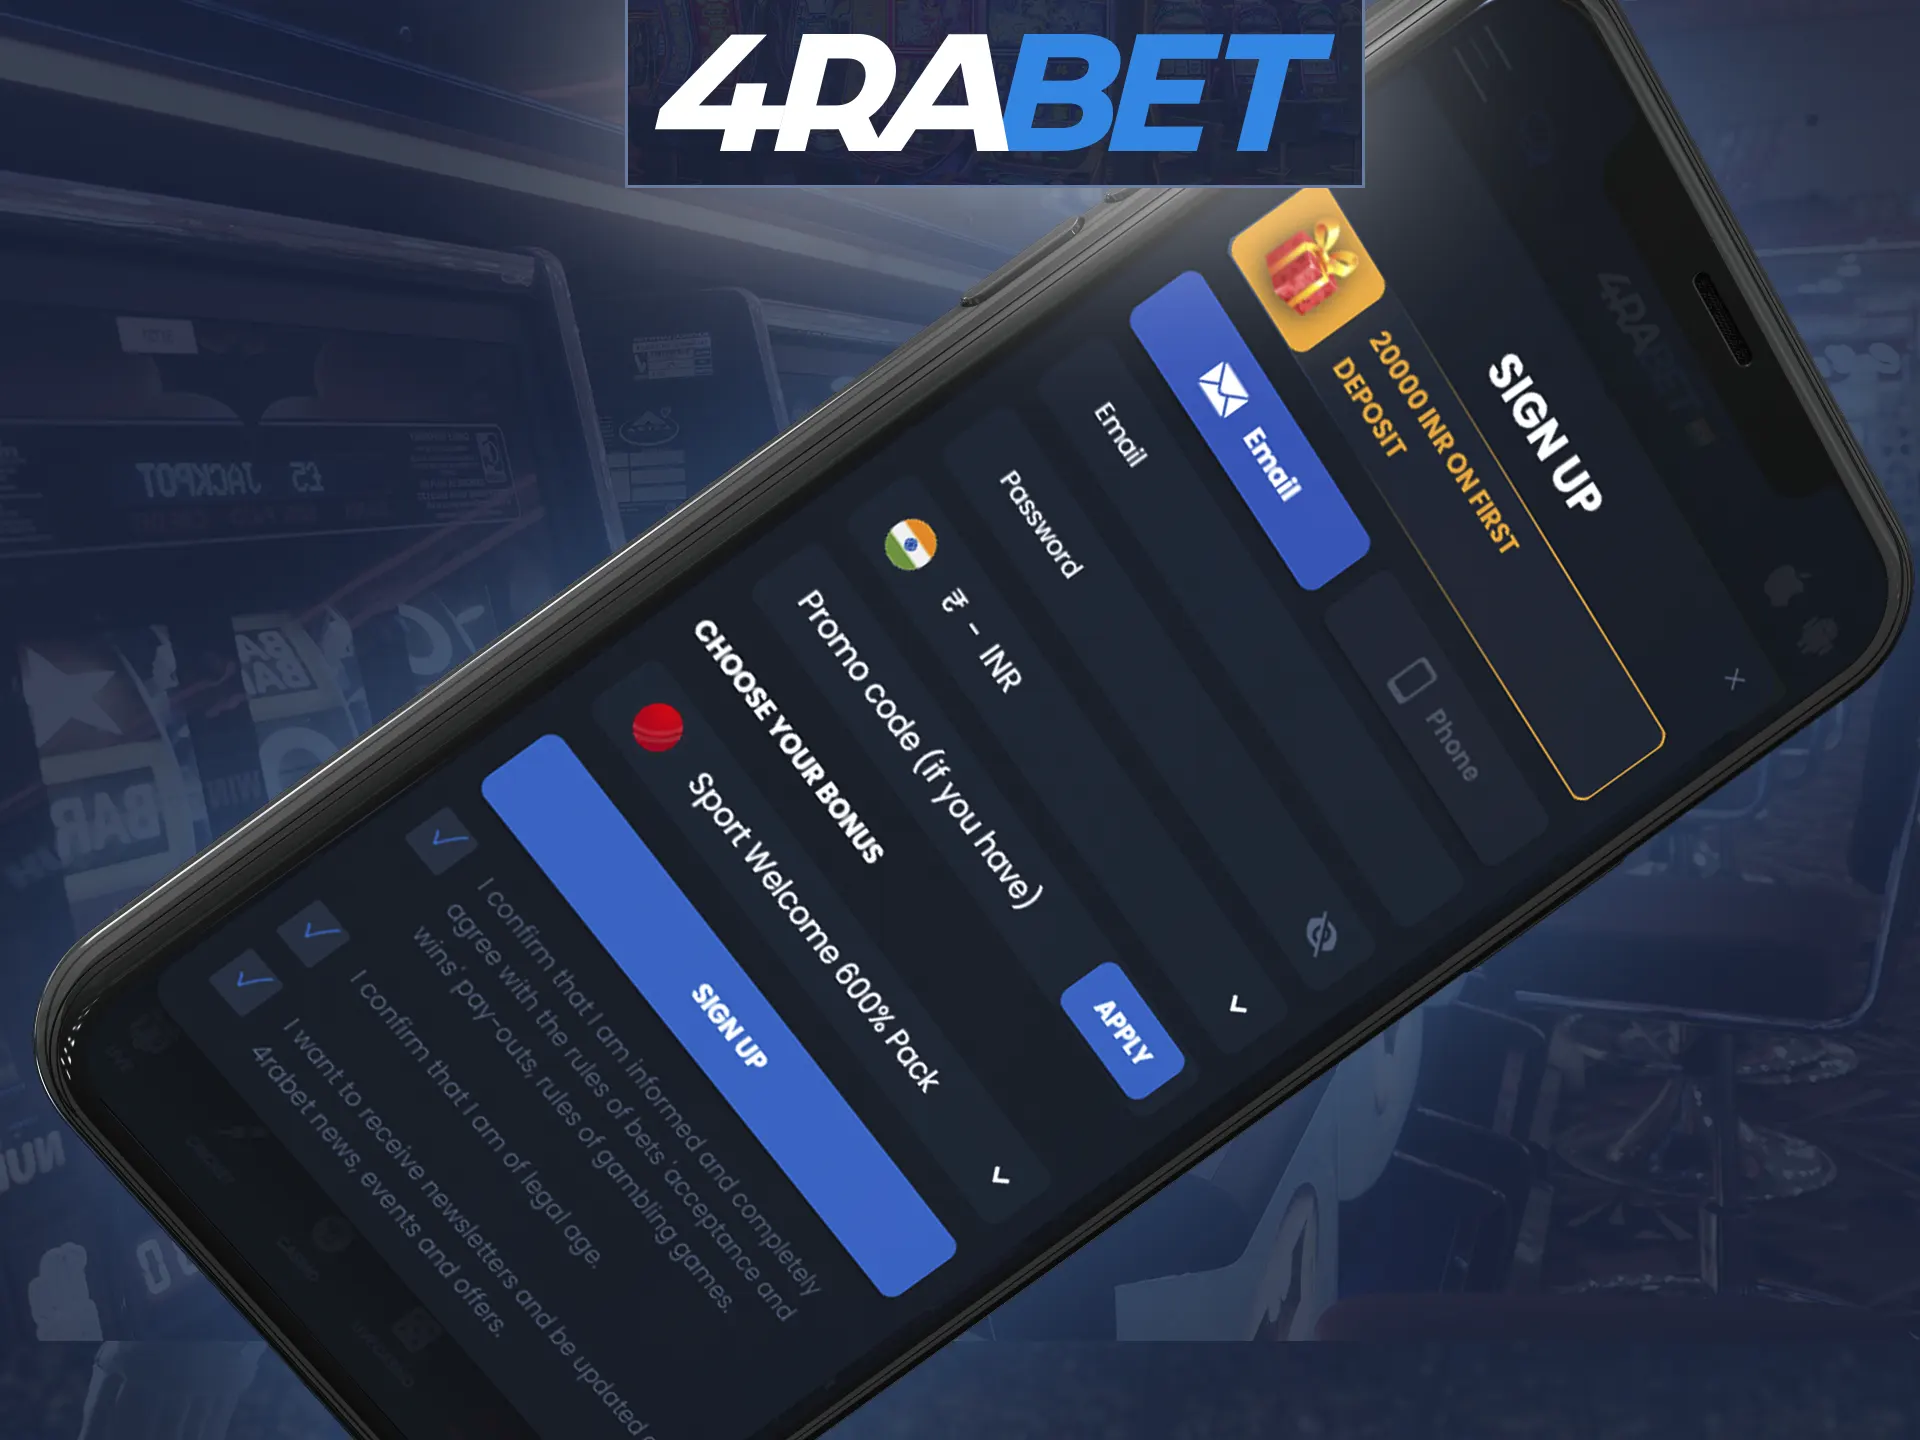 Register at 4Rabet online casino from your mobile device.